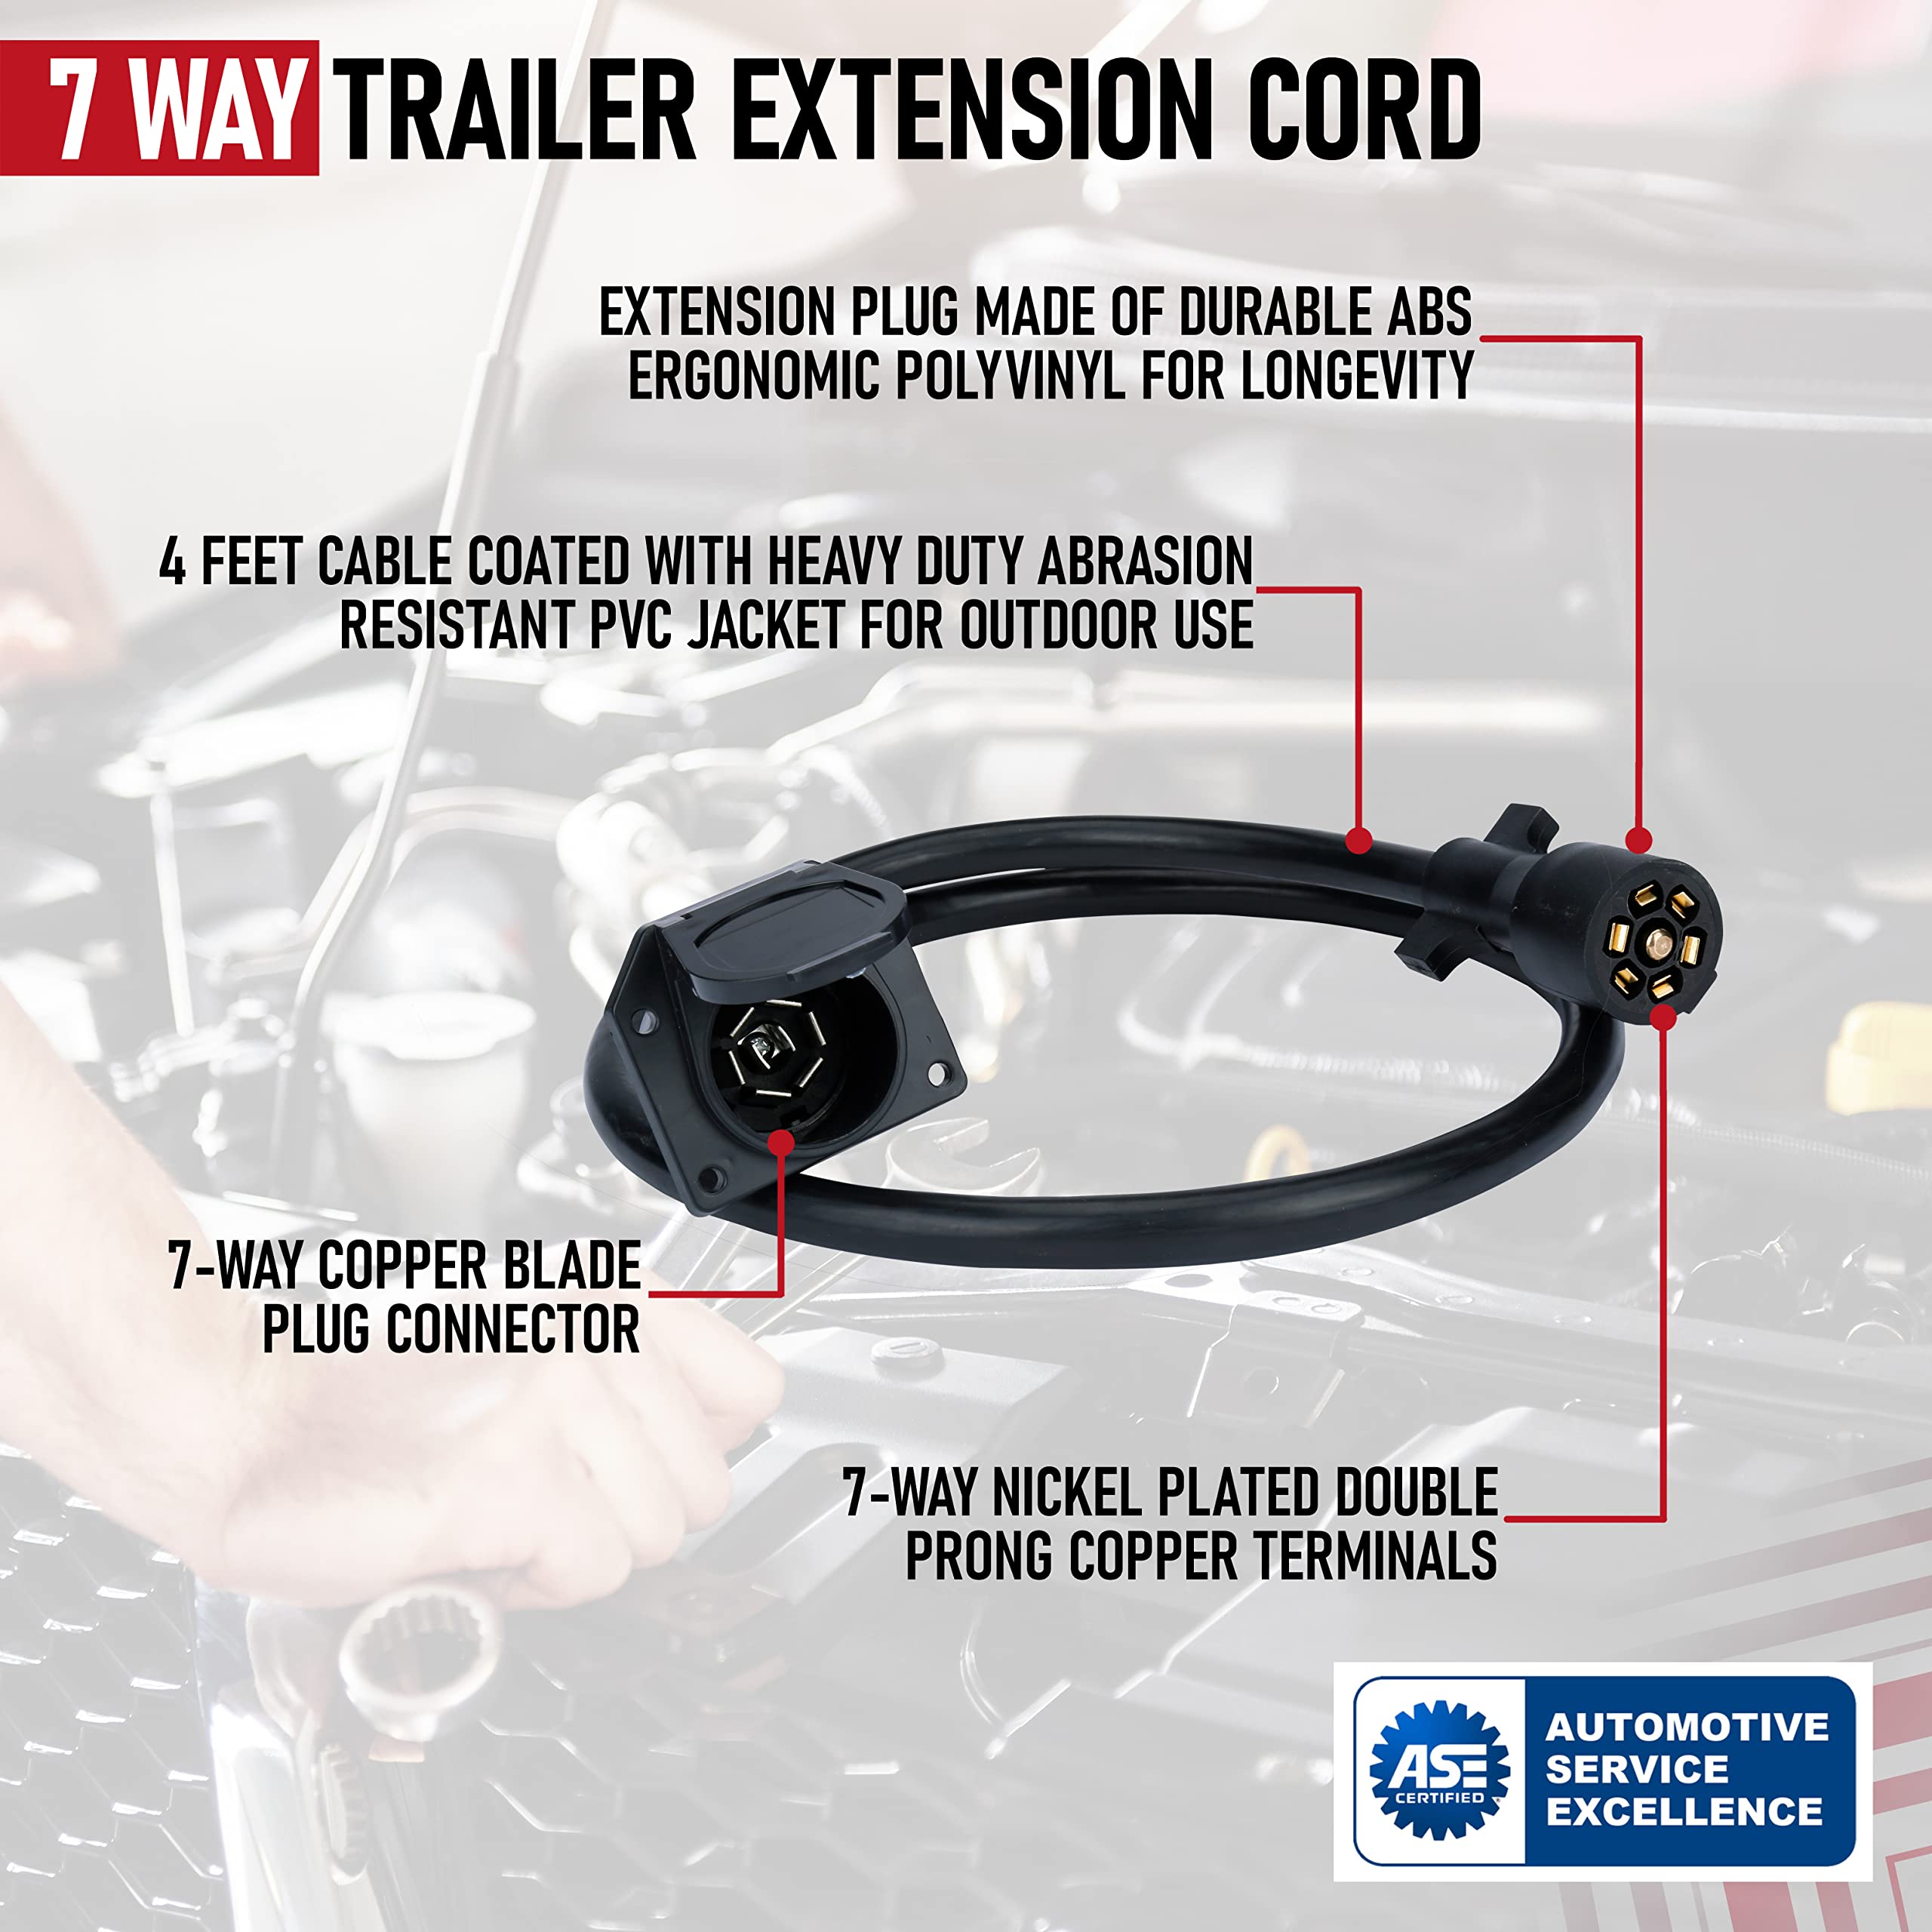 7 Way Trailer Extension Cord - 4 feet - Double Prongs Connector - Weatherproof - 7 Pin Wiring Connector Plug - Gooseneck Hitch Extender or 5th Wheel Trailer, RV, Caravan, Truck, Van - 10-14 AWG  - Like New